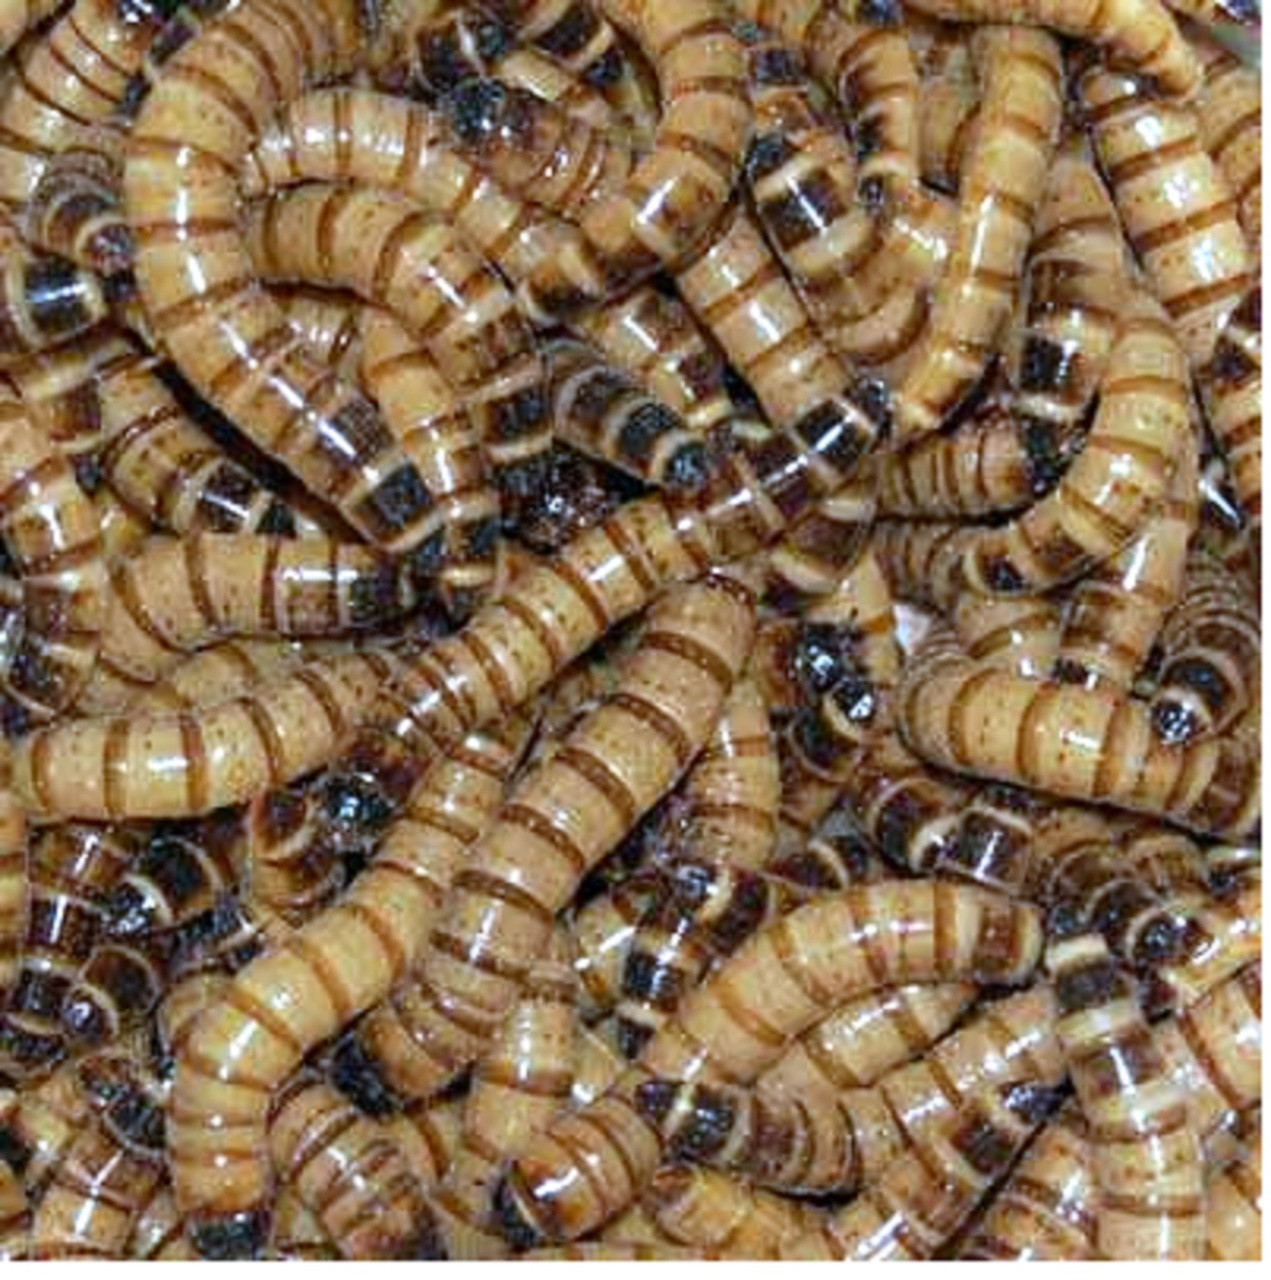 200 Large Superworms-Free Shipping-Live Arrival Guarantee 